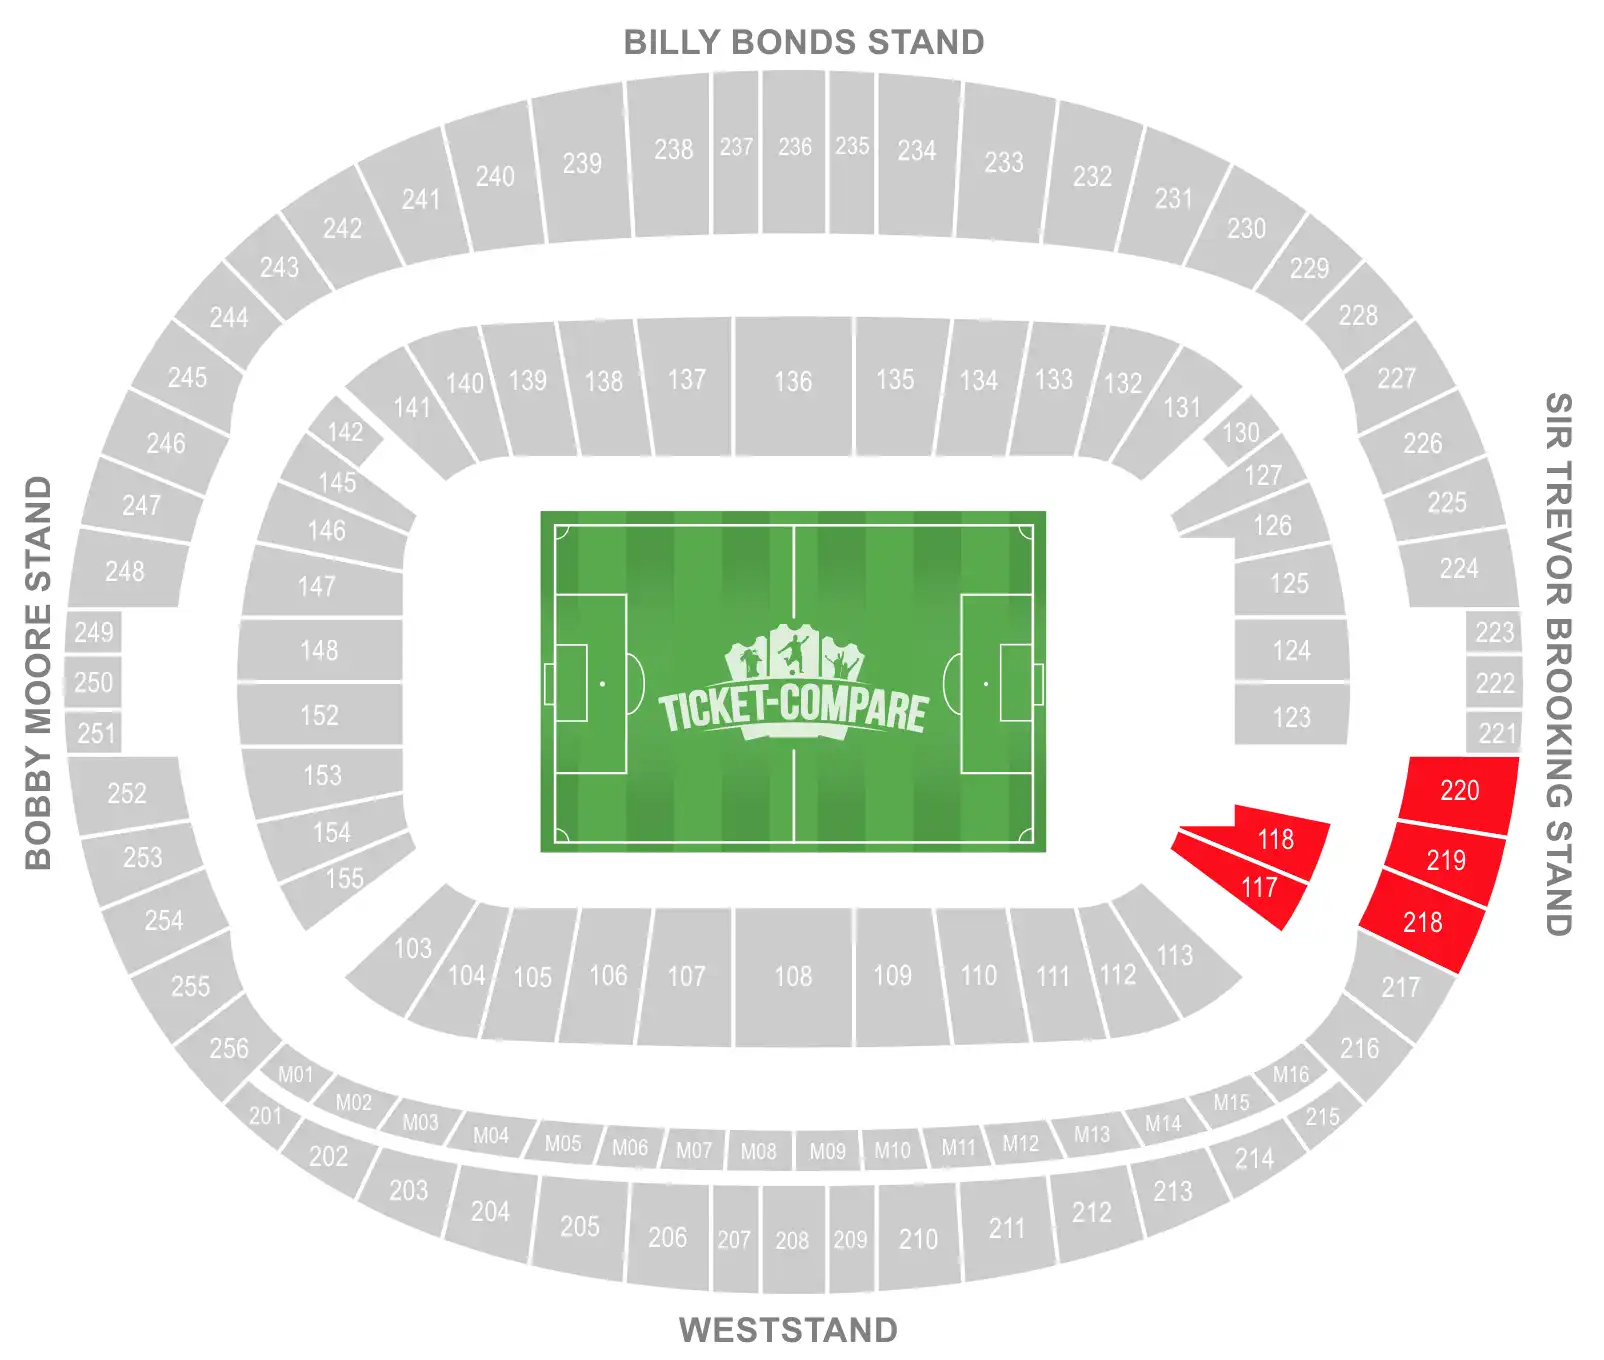 London Stadium seating plan with Away section highligted